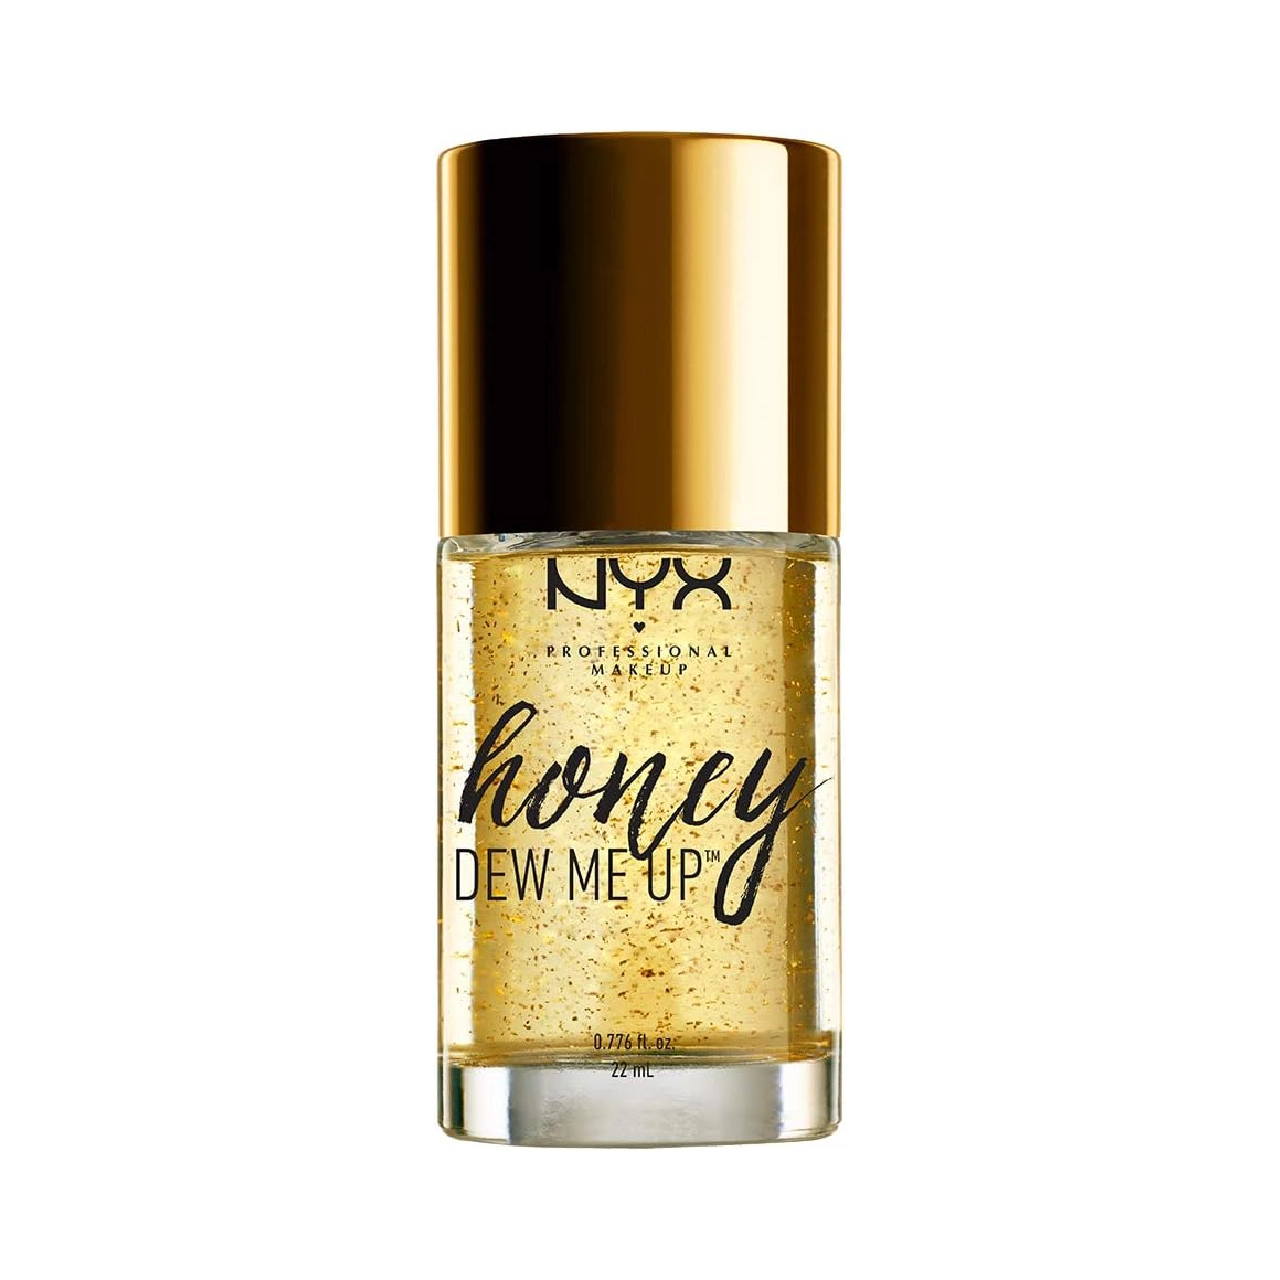 Tube of NYX PROFESSIONAL MAKEUP Honey Dew Me Up Primer Face Makeup against a white background